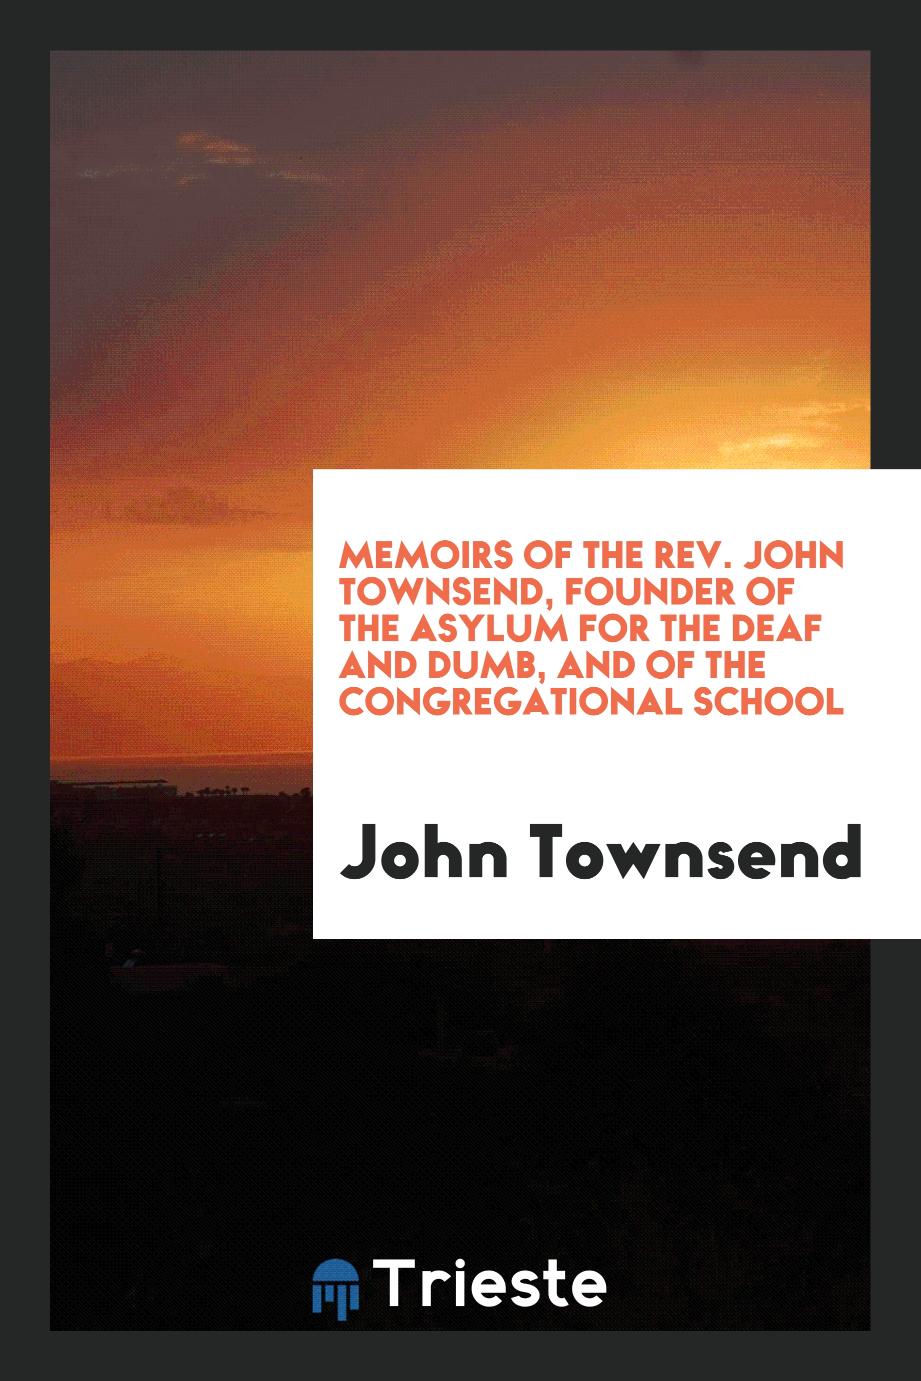 Memoirs of the Rev. John Townsend, founder of the Asylum for the Deaf and Dumb, and of the Congregational School